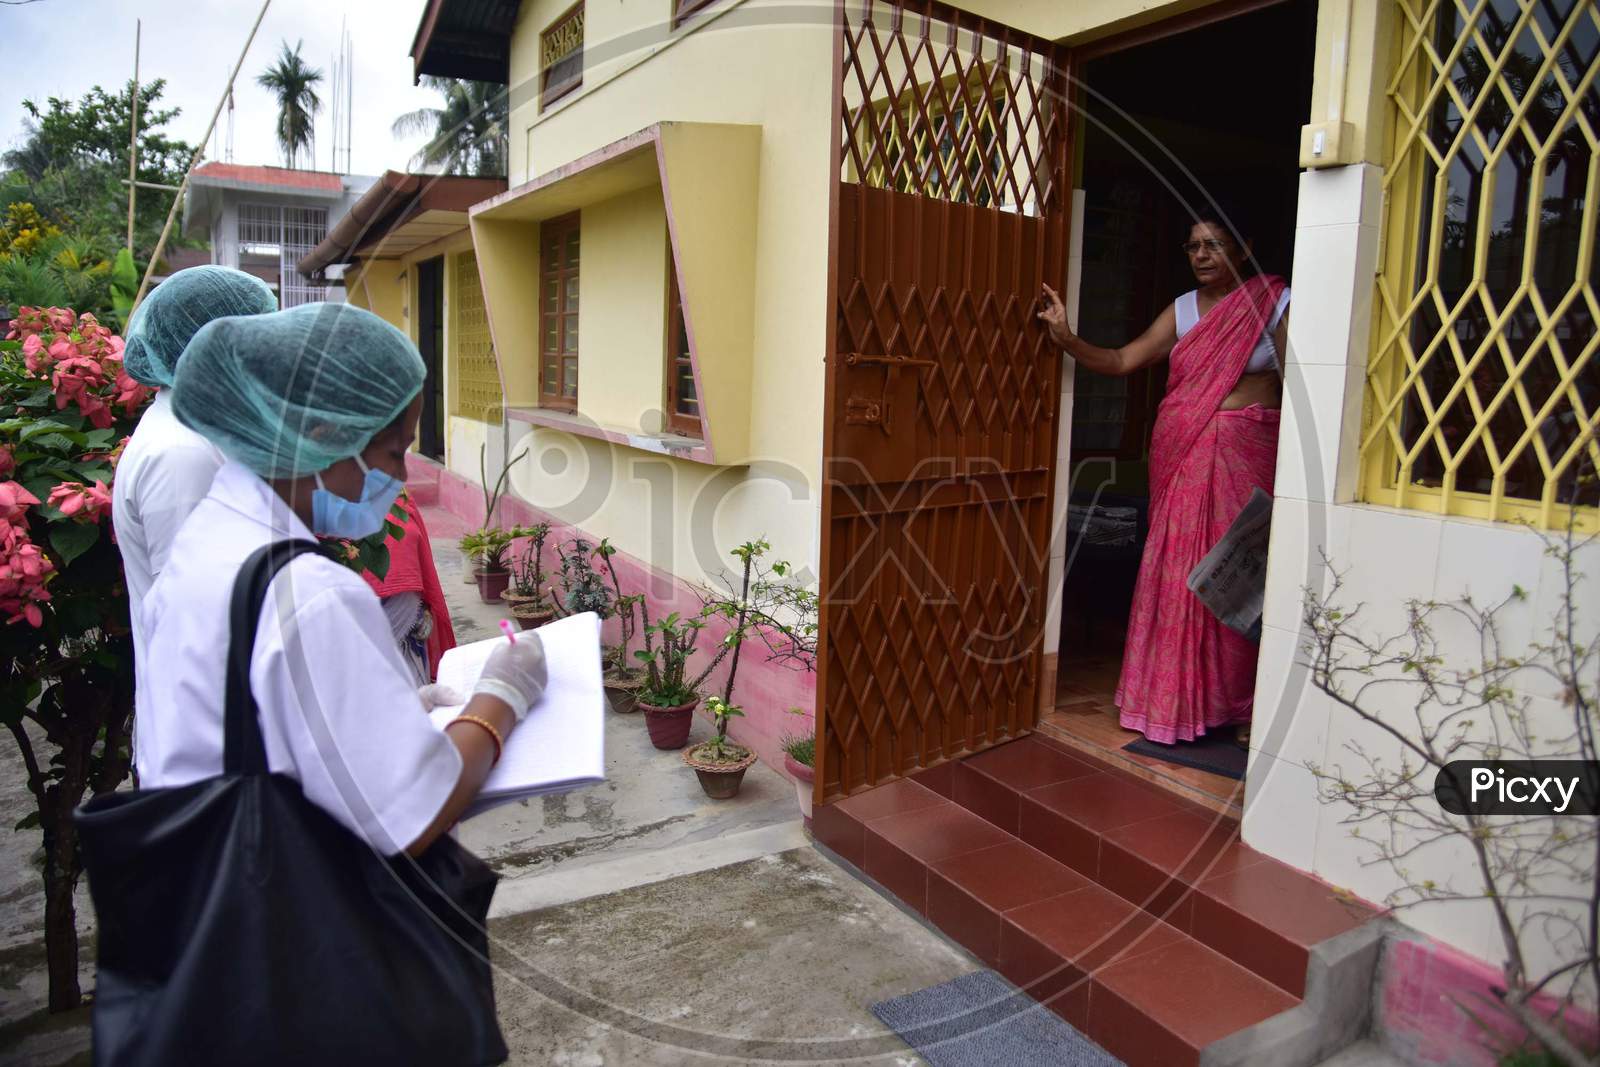 Health Worker Conducting  House To House Health Survey  During Nationwide Lockdown Amidst Coronavirus or COVID-19 Pandemic  In Nagaon District Of Assam,India